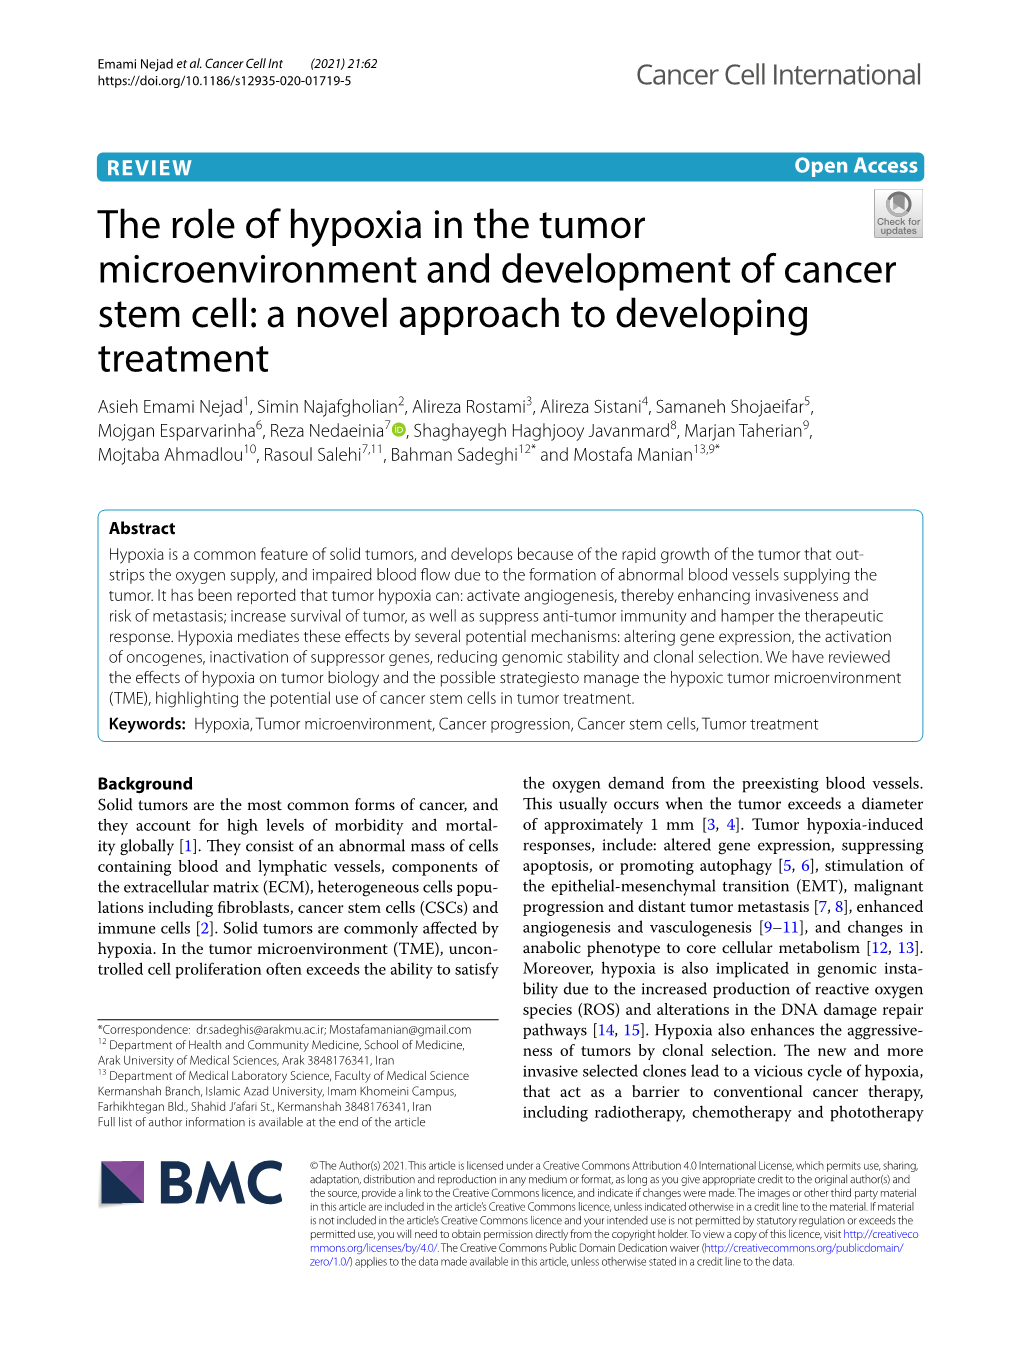 The Role of Hypoxia in the Tumor Microenvironment And